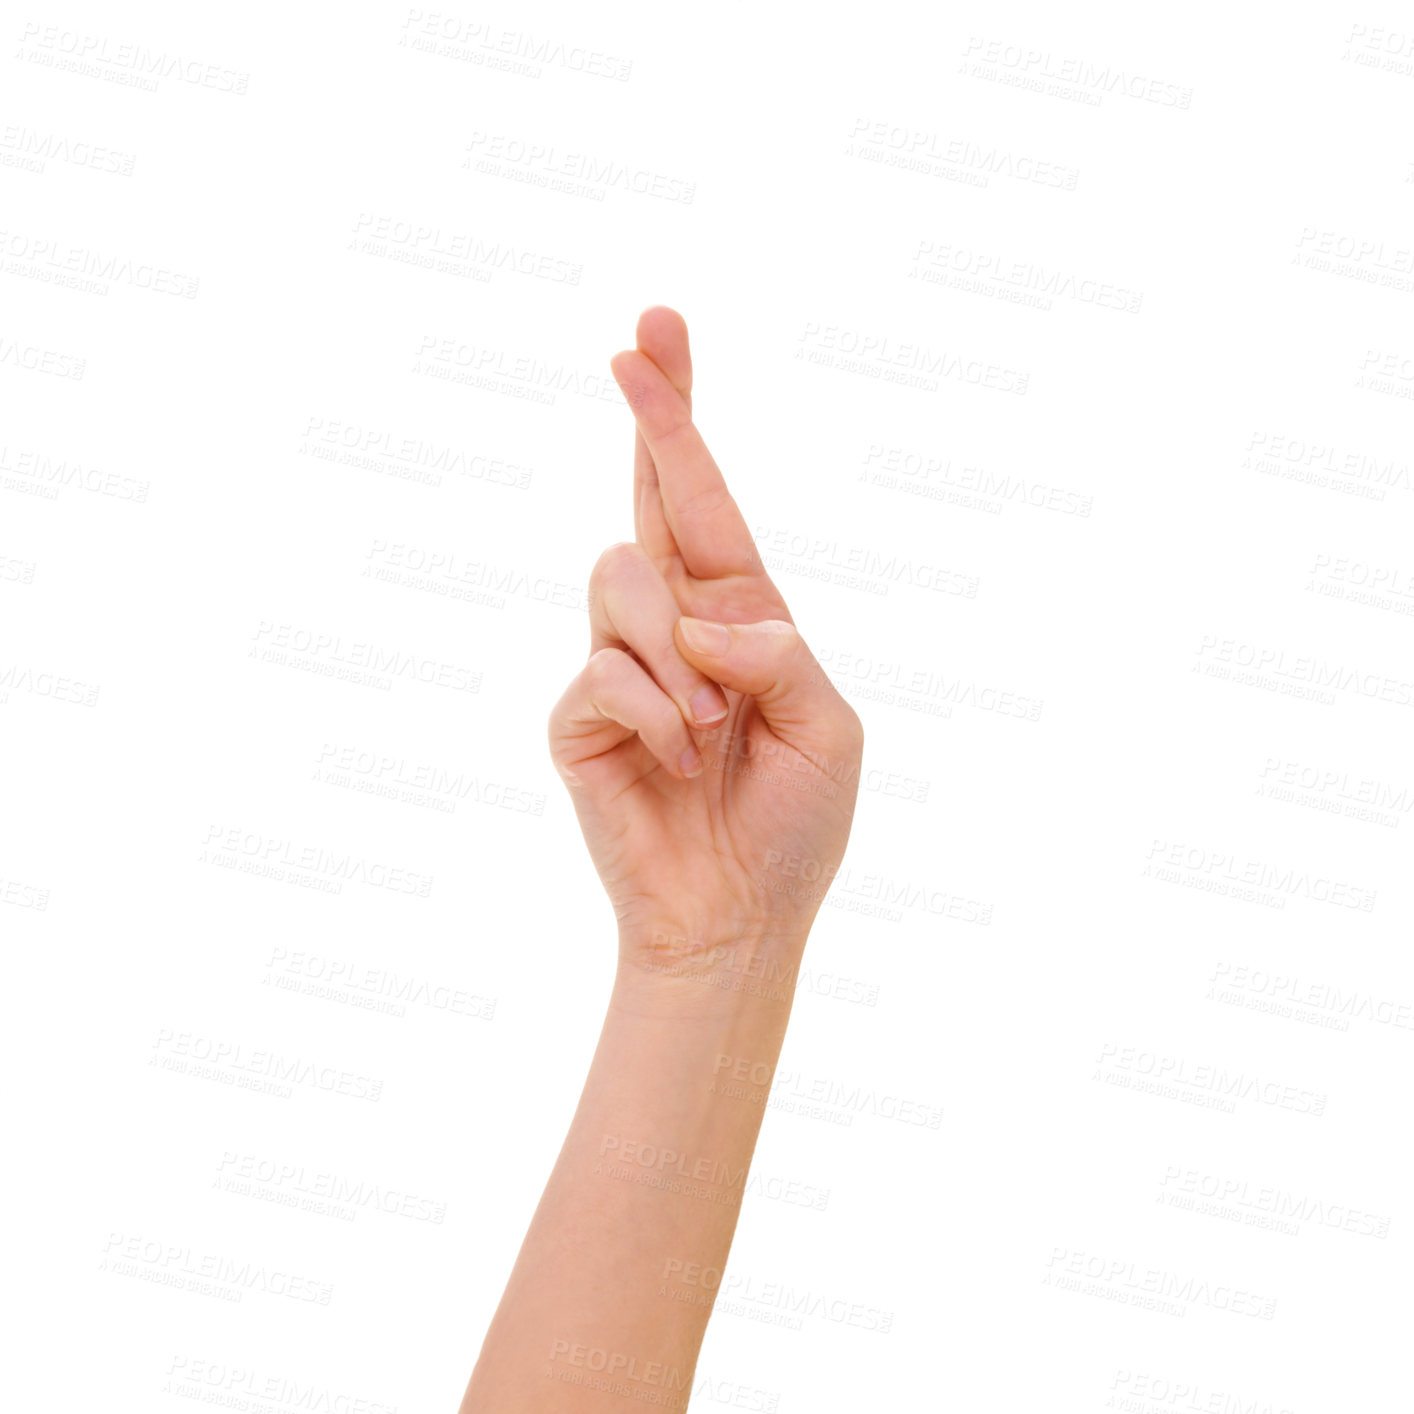 Buy stock photo Fingers crossed, hand and sign language gesture isolated against a studio white background. Luck, hope and wishing closeup with copy space showing optimism, superstition and positivity